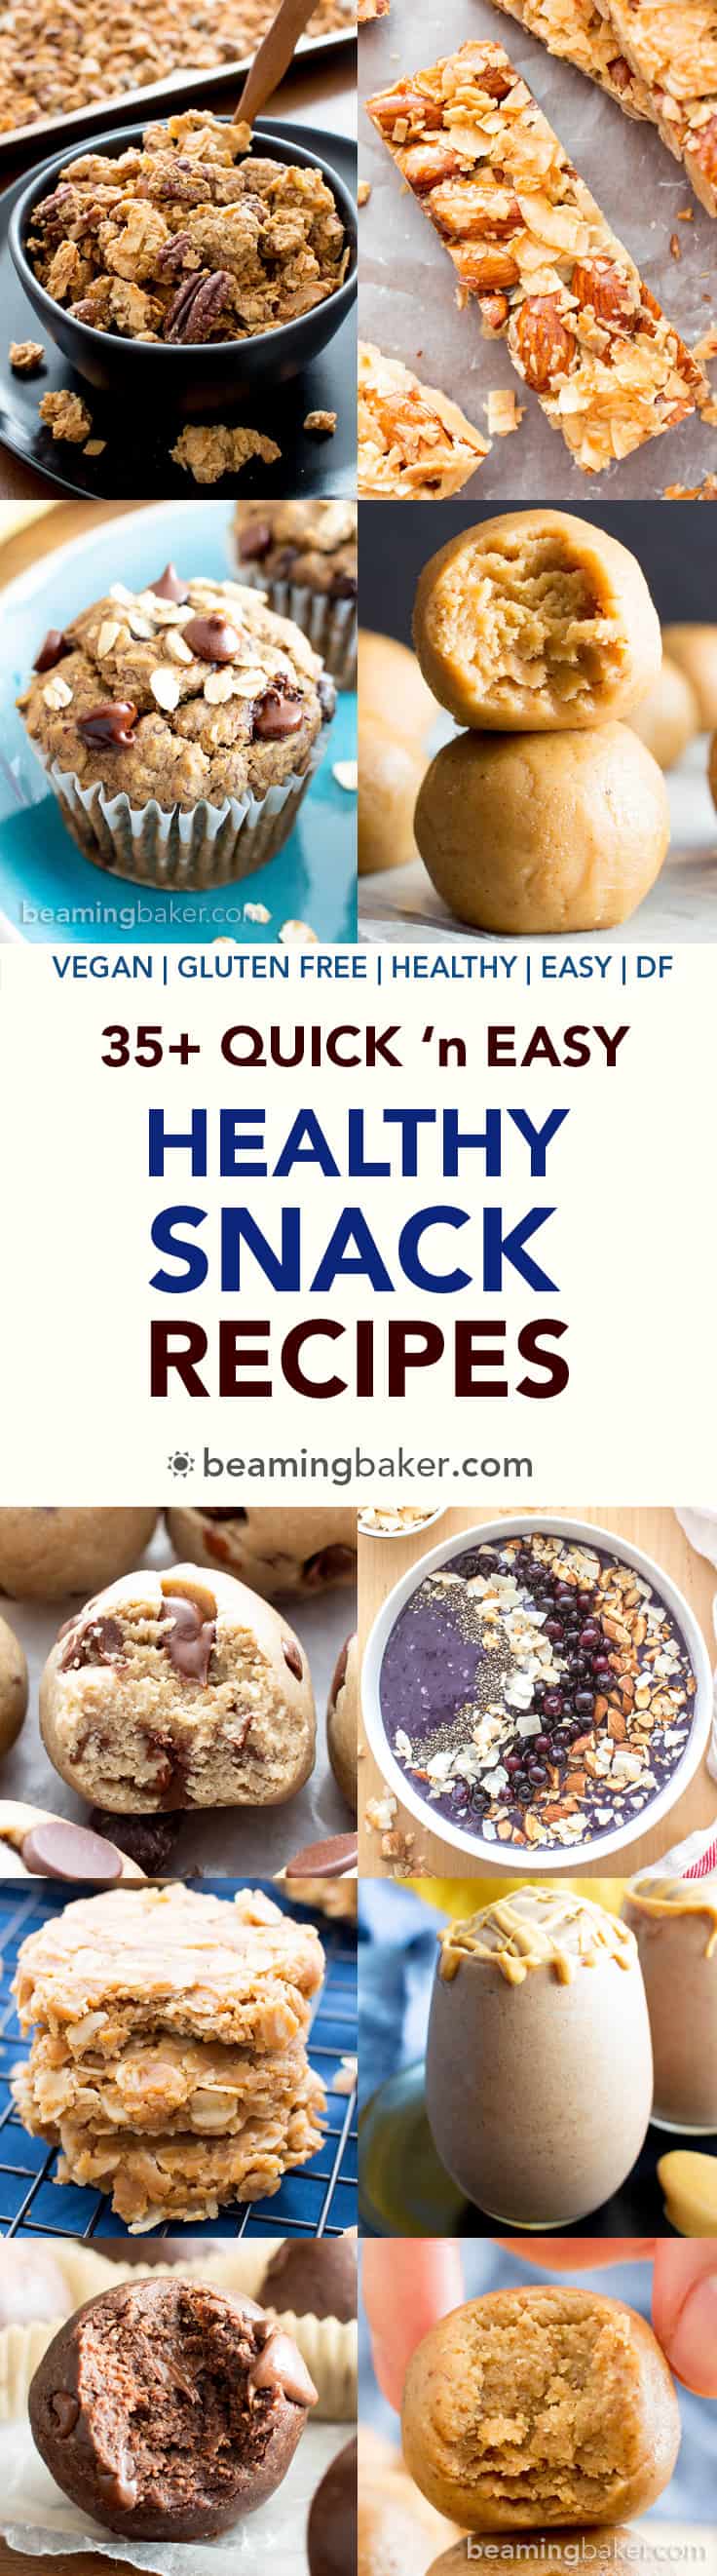 35+ Easy Healthy Snack Recipes (V, GF): an amazing collection of the best quick and easy healthy homemade snack recipes! Featuring no bake bites, granola bars, breakfast cookies and more! #Vegan #GlutenFree #DairyFree #RefinedSugarFree #Healthy #Snacks | Recipes on BeamingBaker.com